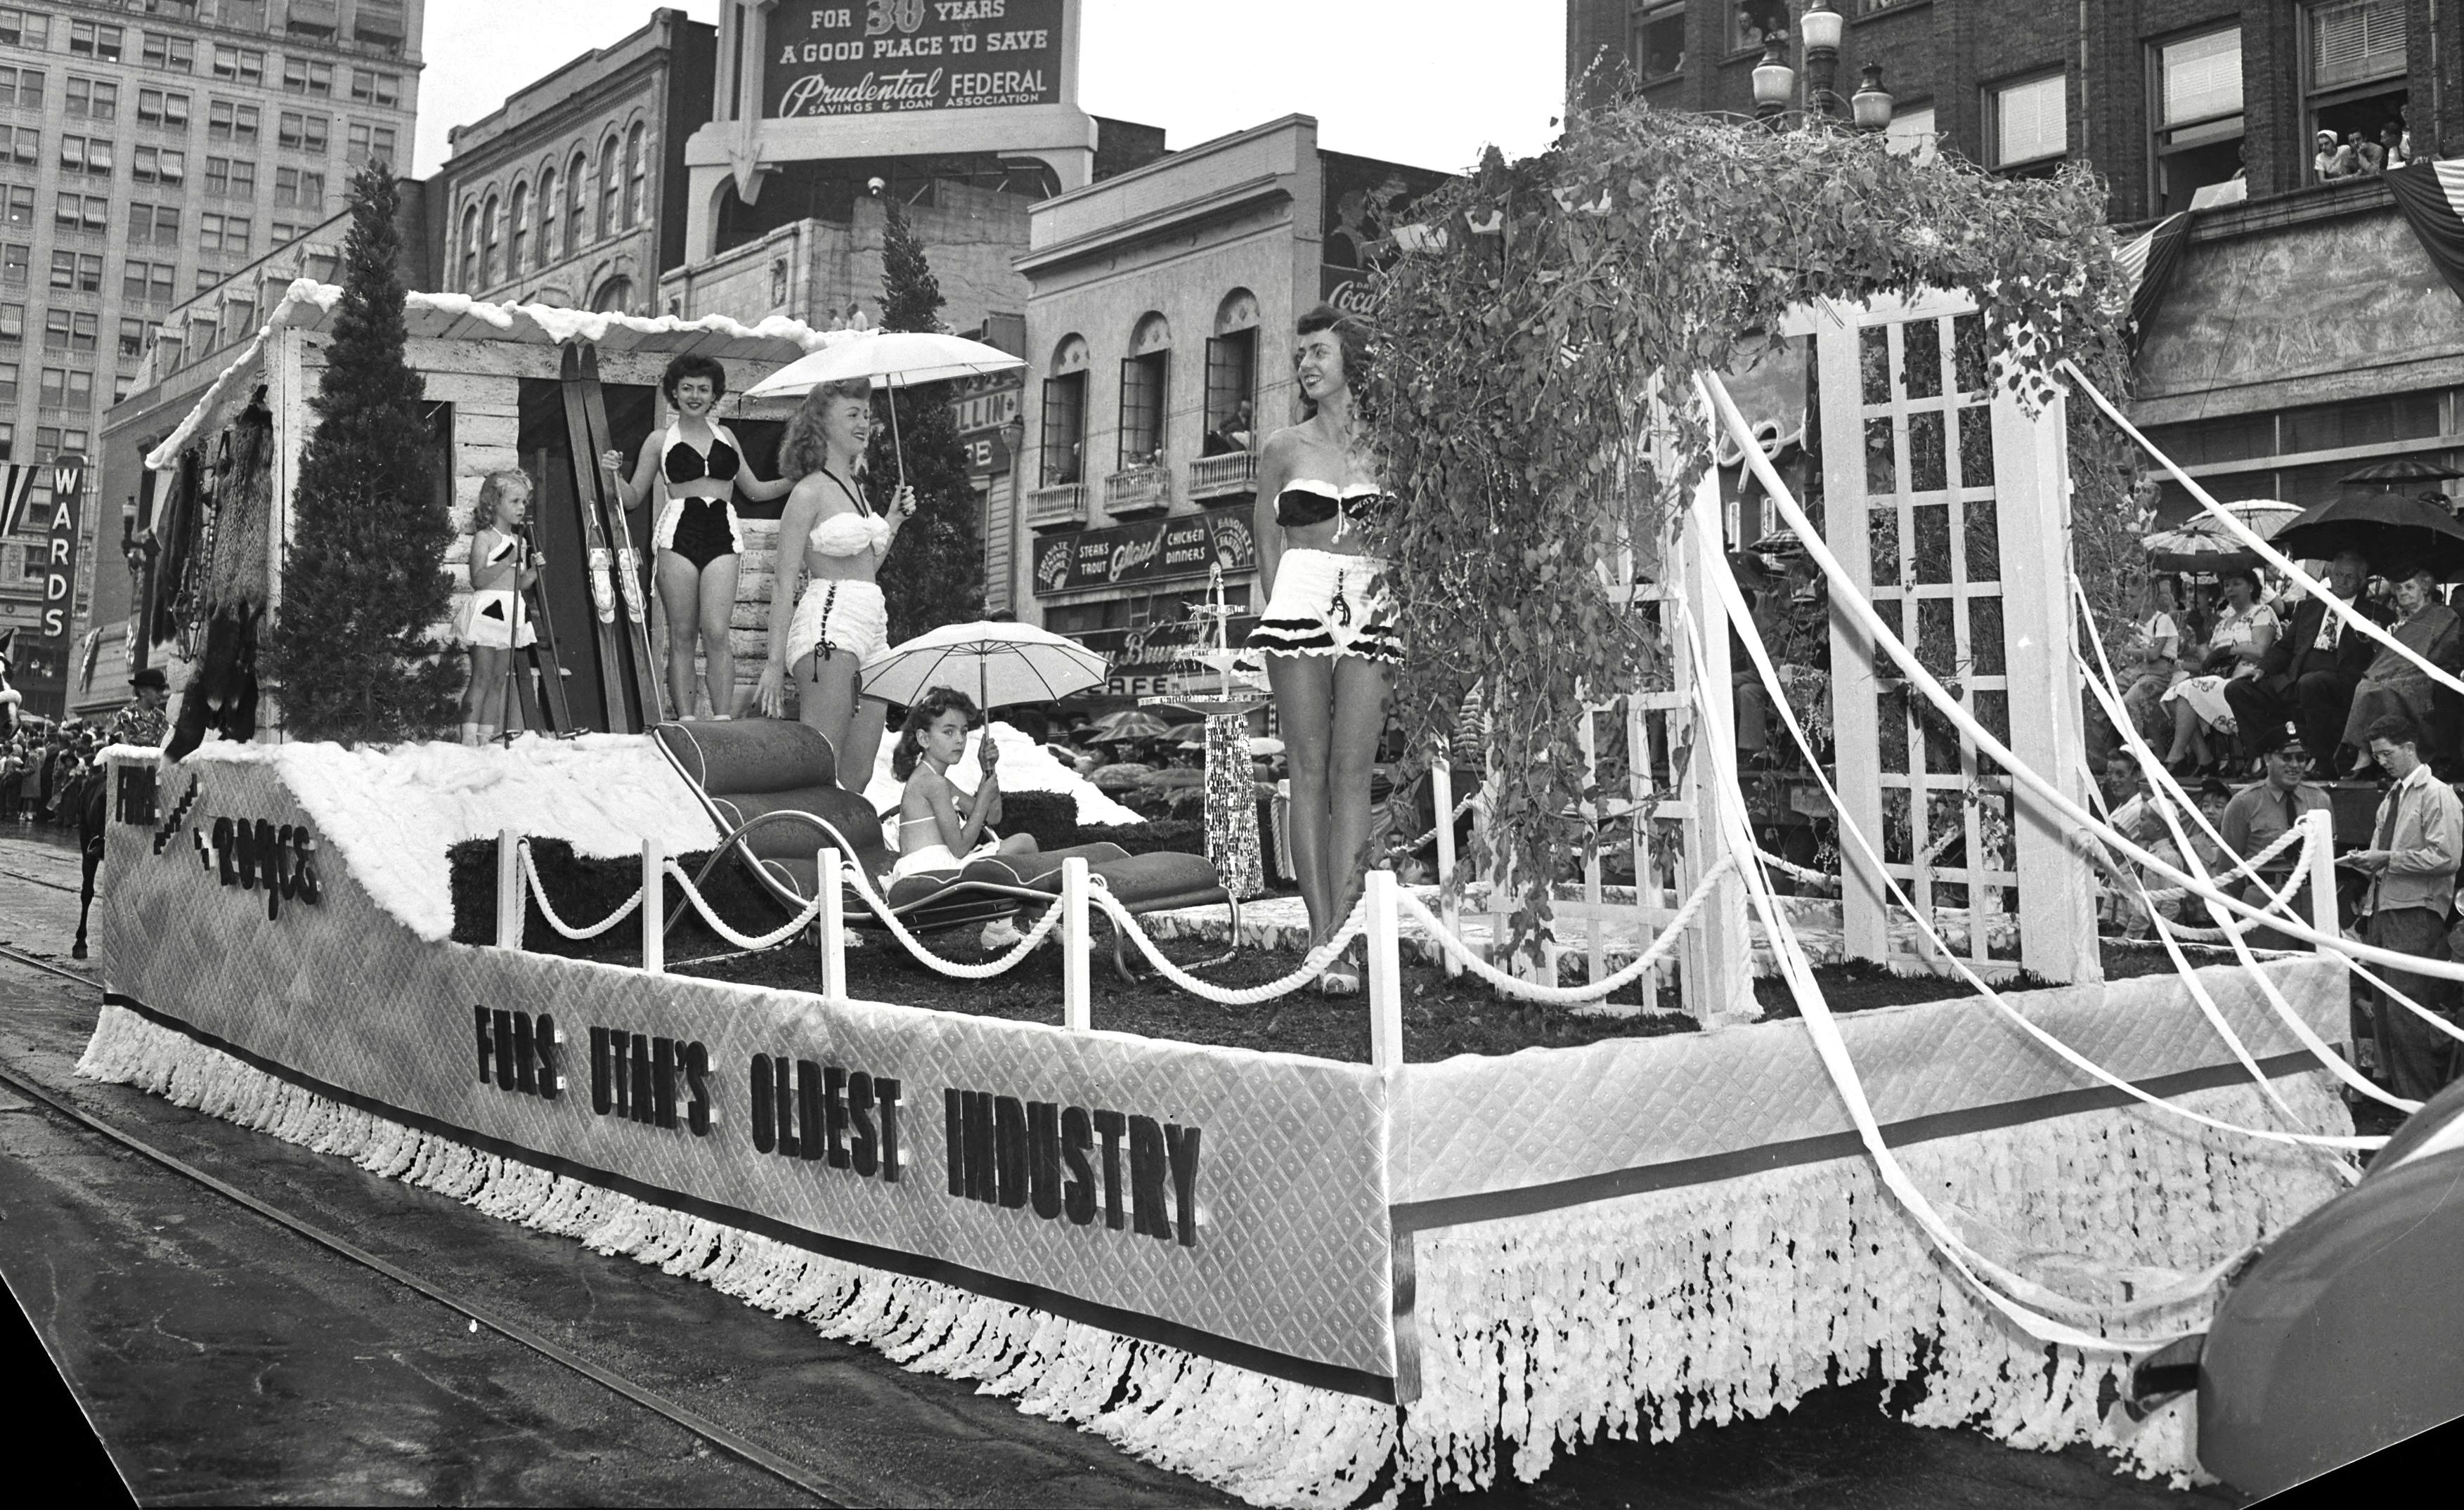 A 1946 parade float shows women in bikinis with a ski lodge and a pergola.